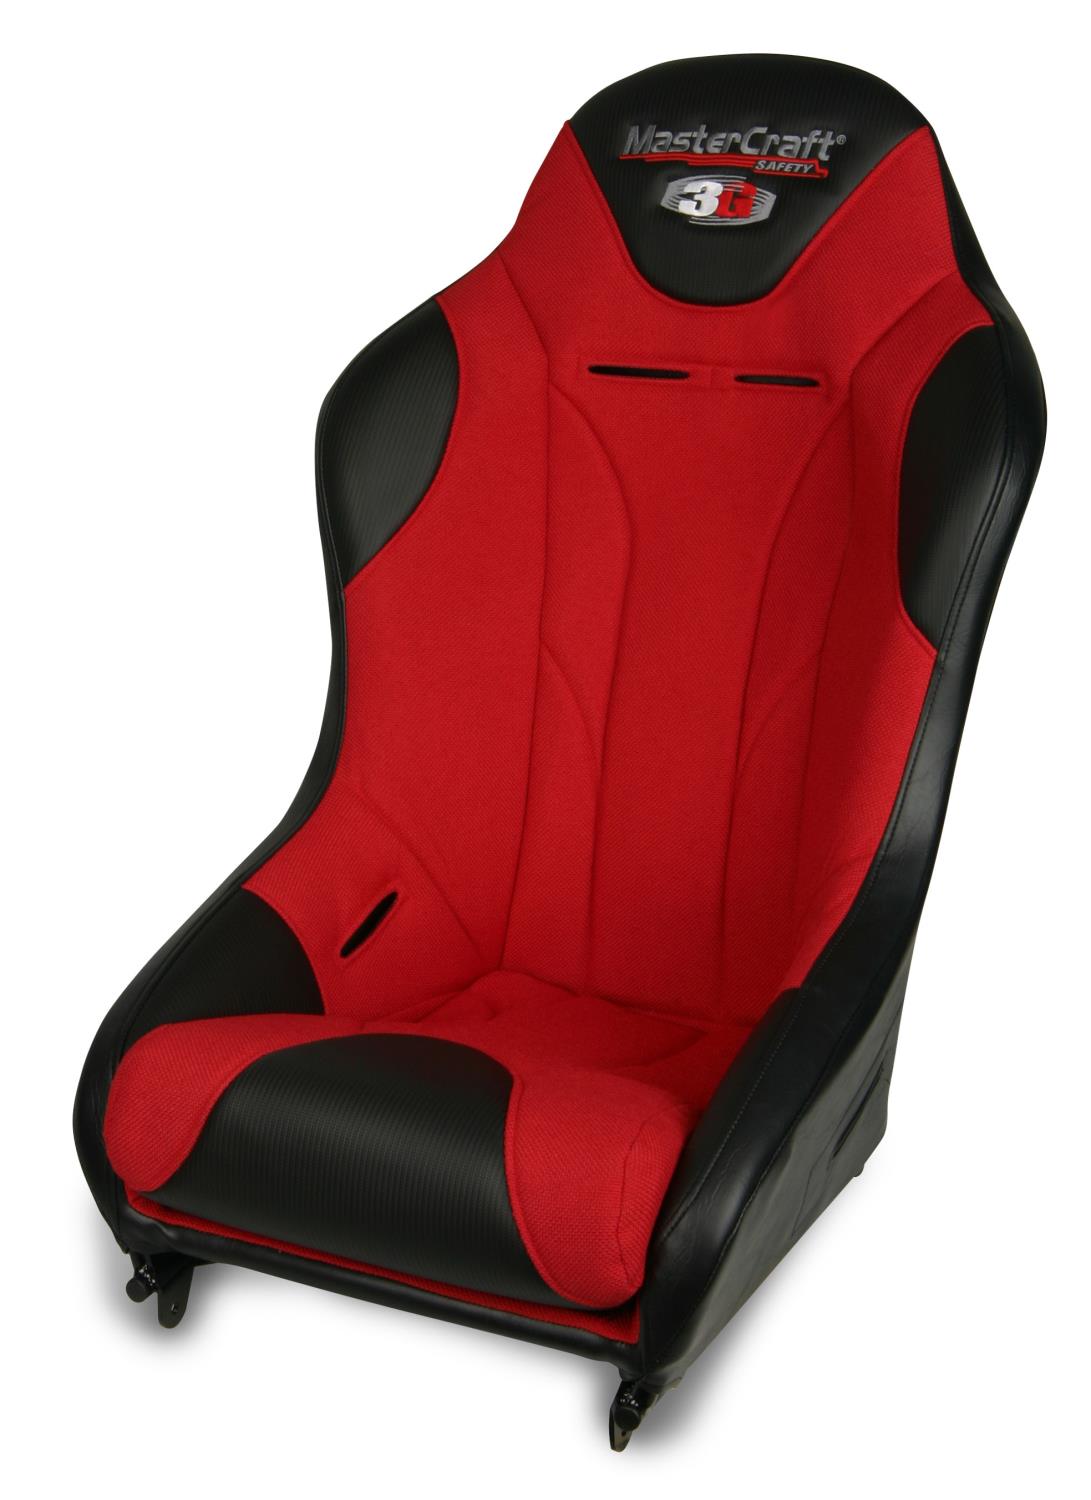 572012 Standard 3G-4 Seat w/DirtSport Stitch Pattern, Black with Red Fabric Center and Red Side Panels, Black Band